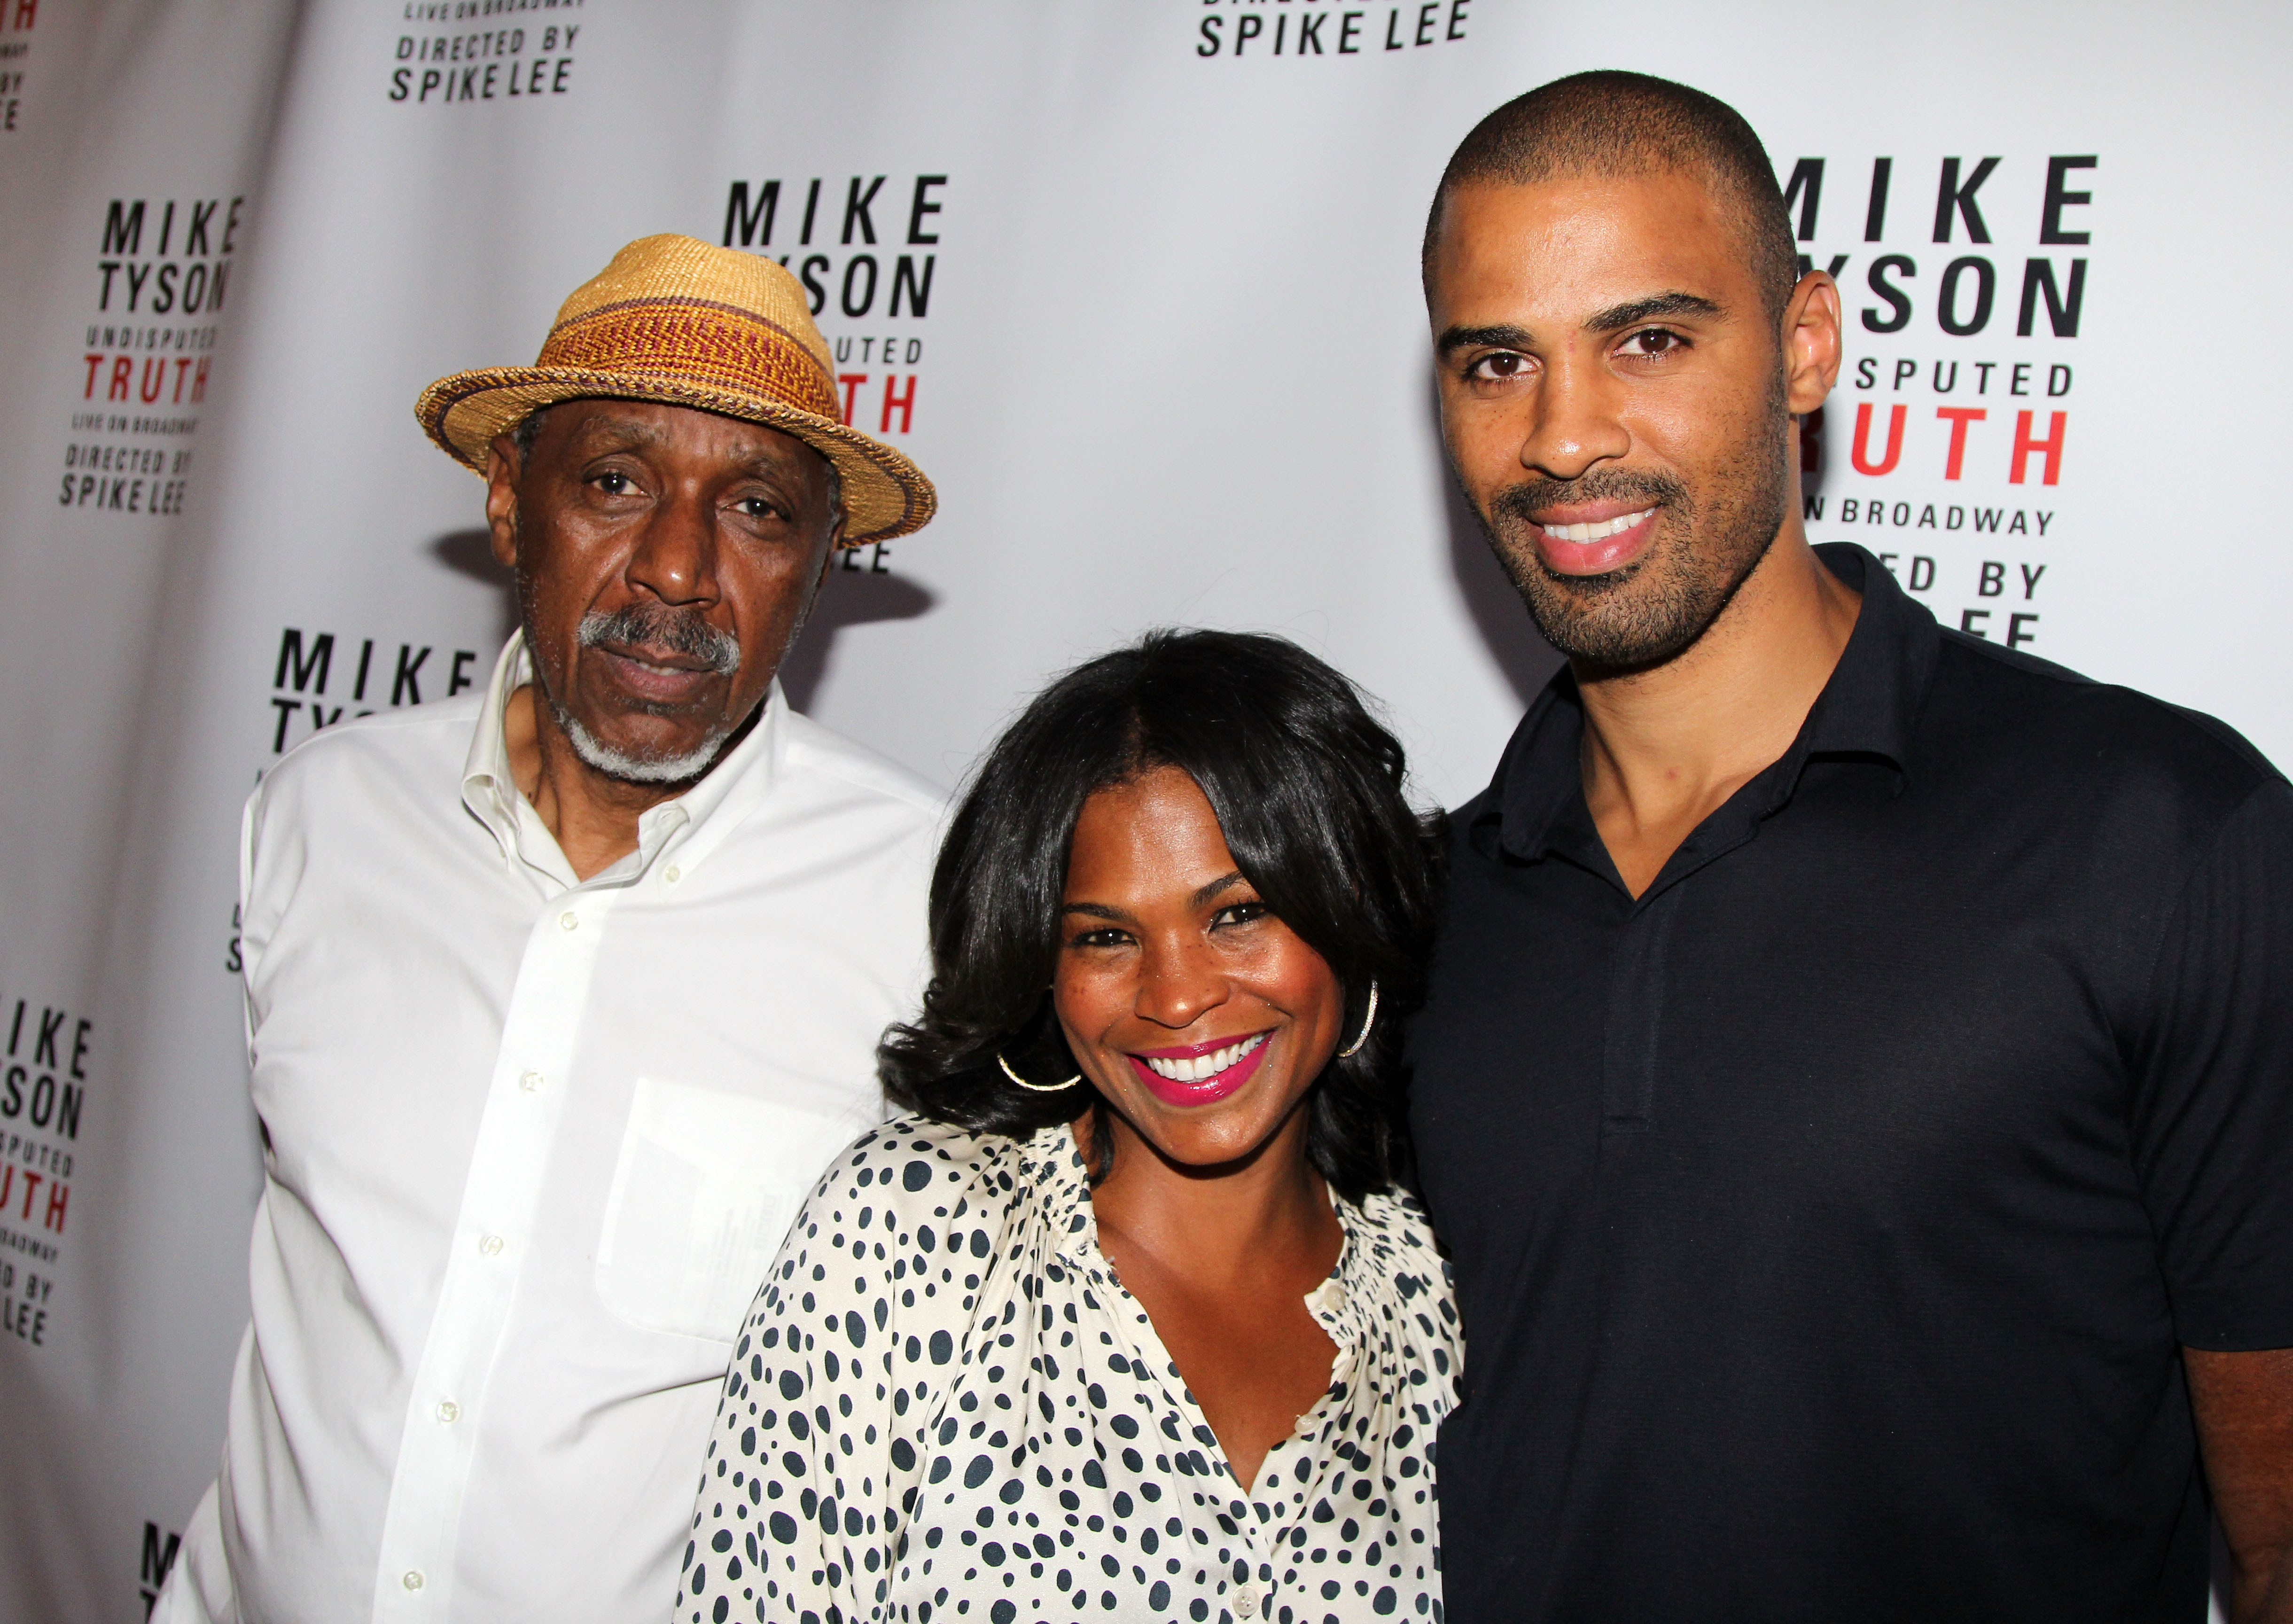 Doughtry Long, Nia Long, and Ime Udoka at the Broadway opening night for "Mike Tyson: Undisputed Truth" on August 2, 2012, in New York City | Source: Getty Images